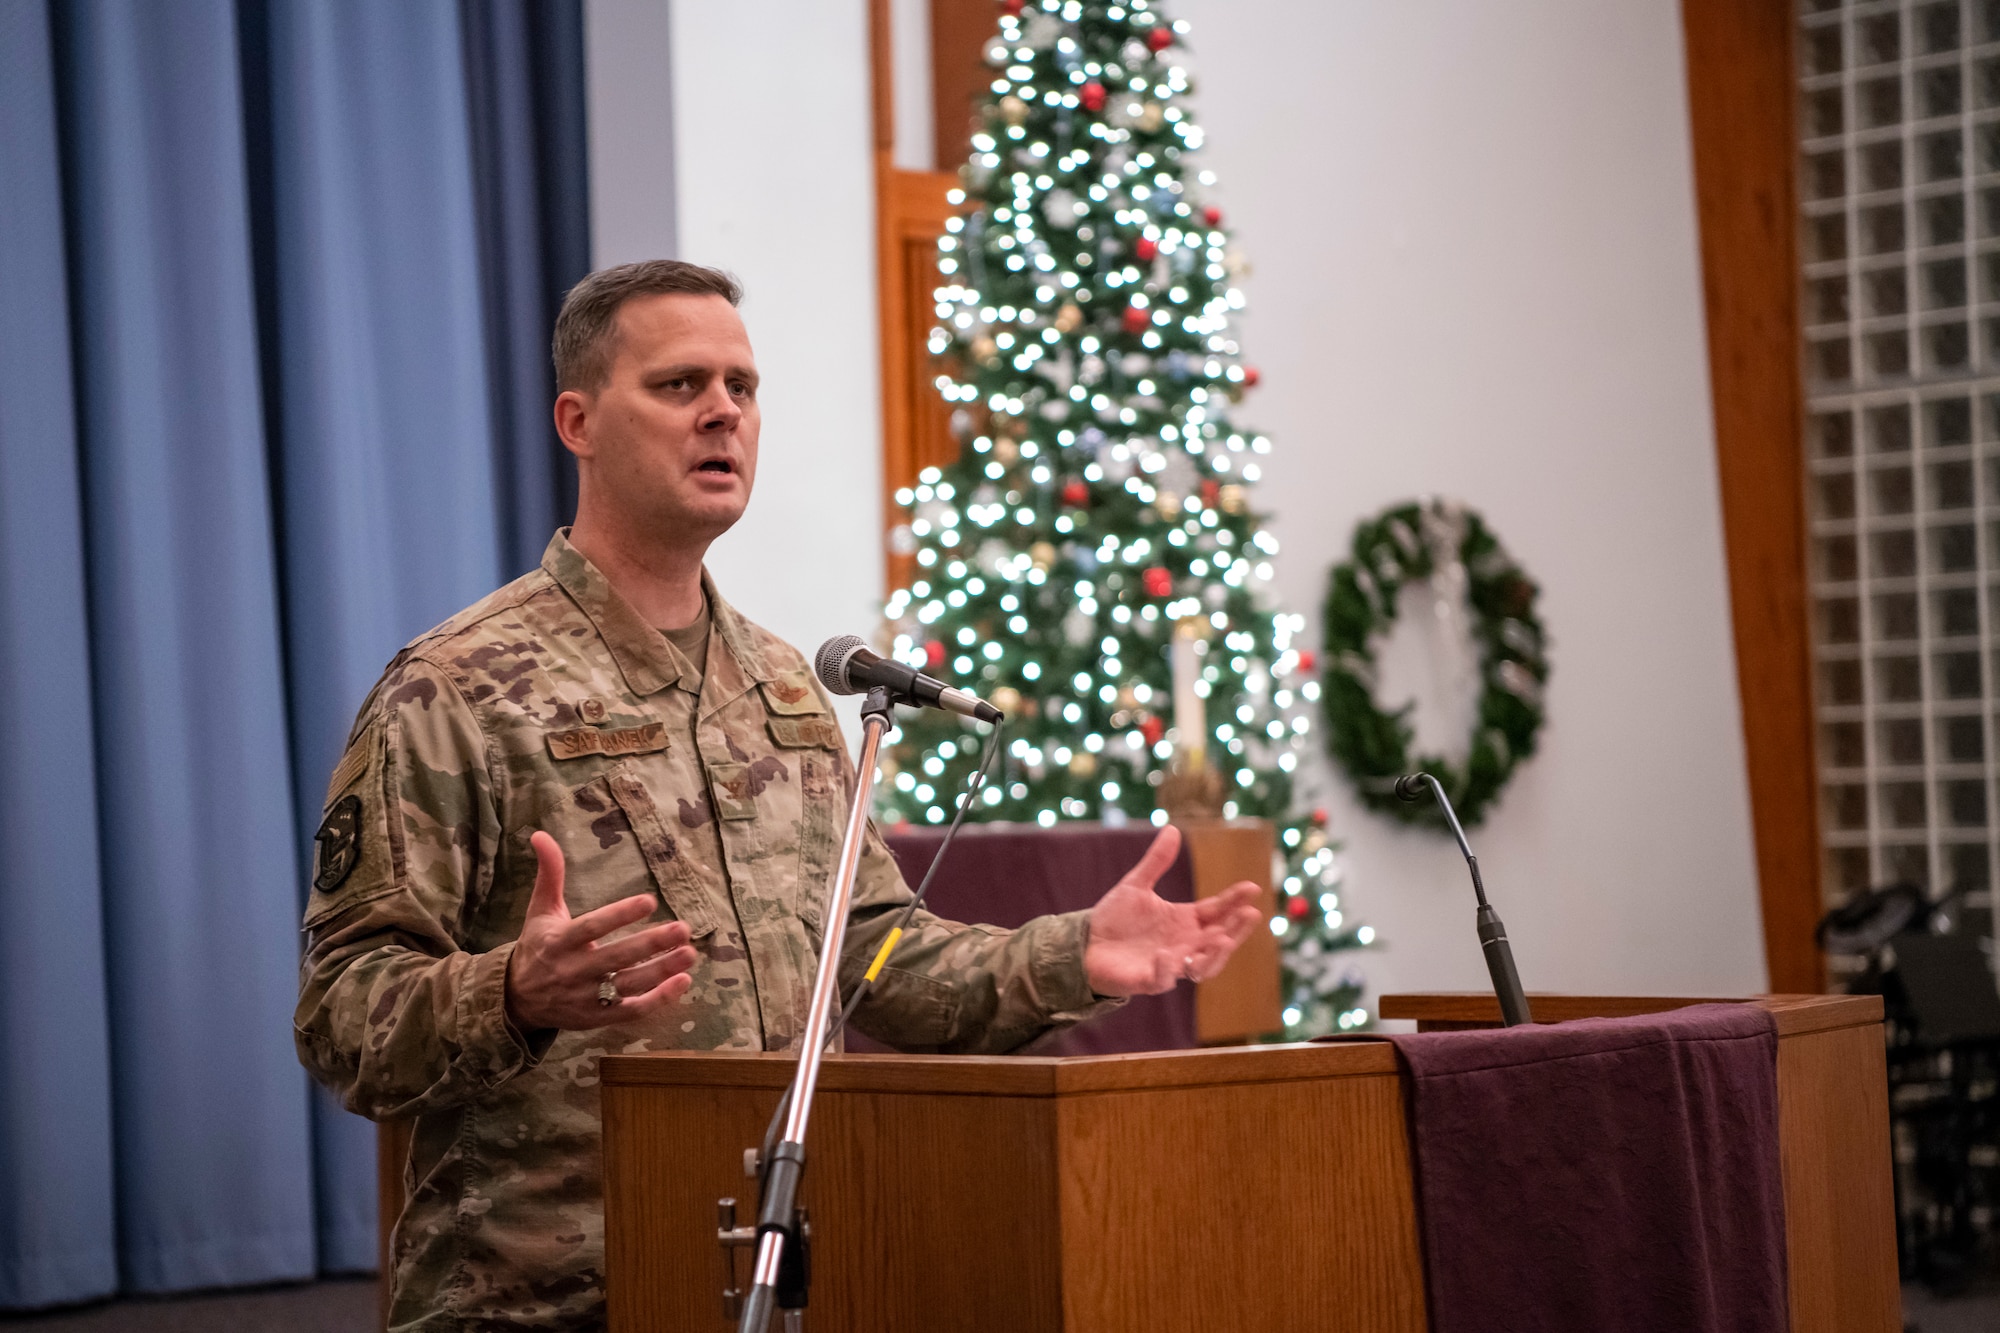 Col. Joel Safranek, 436th Airlift Wing commander, speaks at the annual Christmas tree lighting ceremony Dec. 3, 2019, Dover Air Force Base, Del. The event included Christmas carols, tree lighting and a visit from Santa Claus. (U.S. Air Force photo by Senior Airman Christopher Quail)